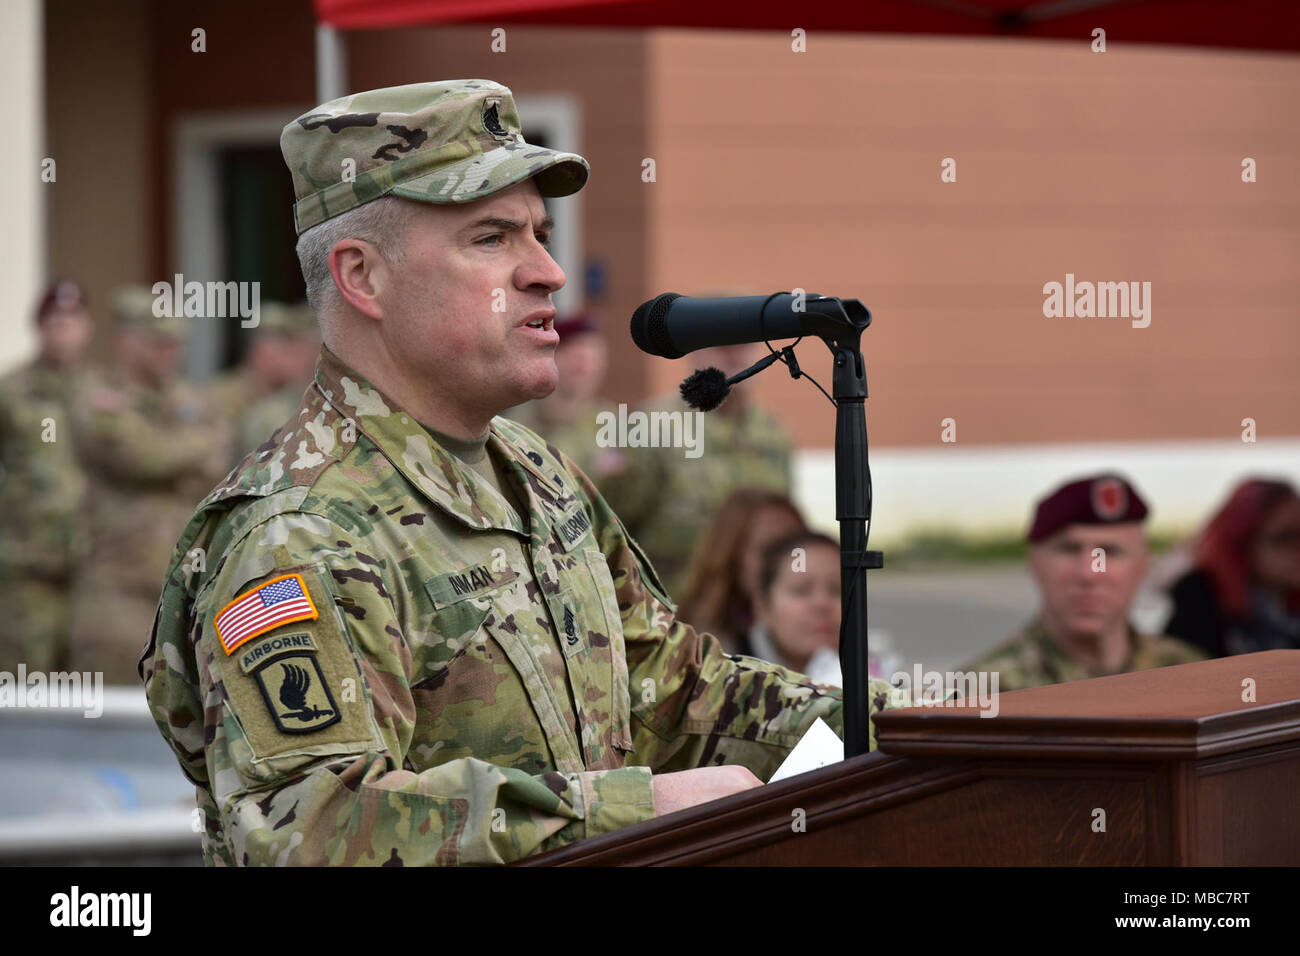 Command Sgt. Maj. Jeremiah E. Inman, CSM U.S. Army Africa, speaks during the Expert Infantryman Badge (EIB) ceremony at Caserma Del Din, Vicenza, Italy, 15 Feb. 2018. (U.S. Army Stock Photo